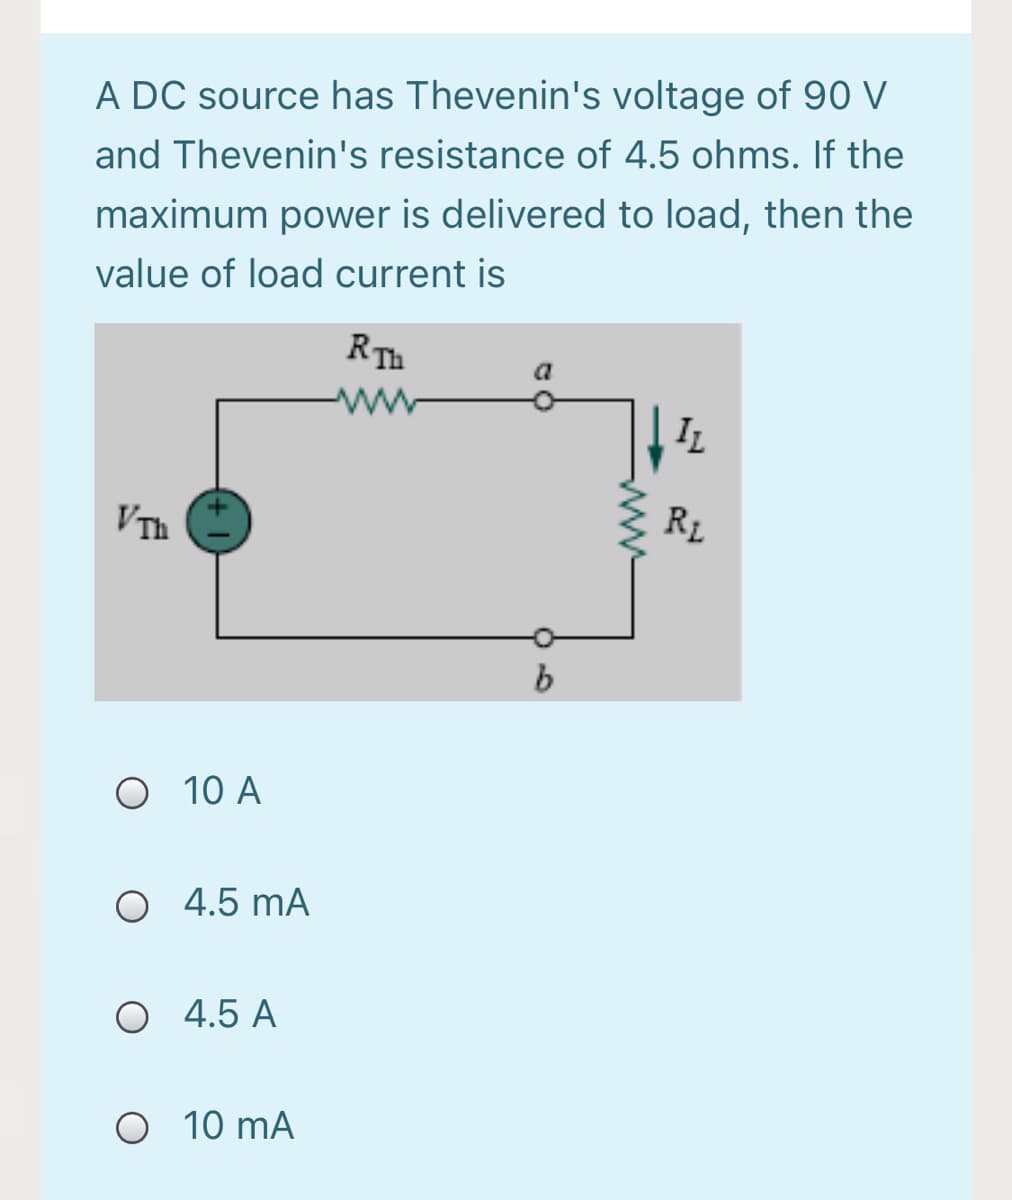 A DC source has Thevenin's voltage of 90 V
and Thevenin's resistance of 4.5 ohms. If the
maximum power is delivered to load, then the
value of load current is
RTh
IL
VTh
R1
O 10 A
O 4.5 mA
O 4.5 A
O 10 mA
ww
